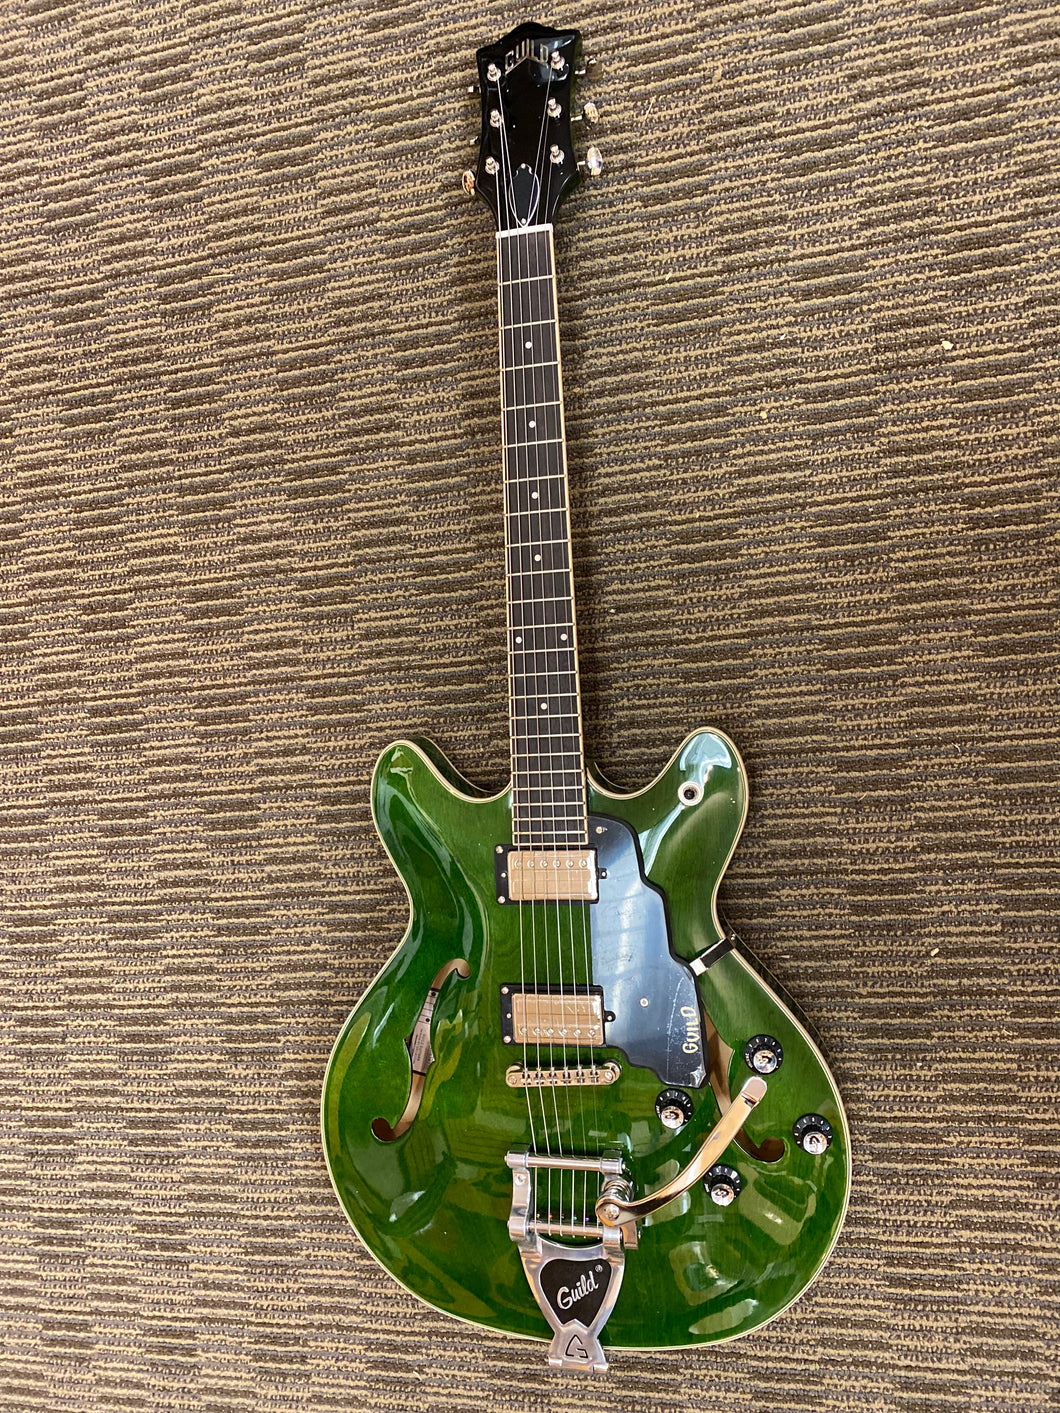 Guild i-DC Emerfald green with Bigsby